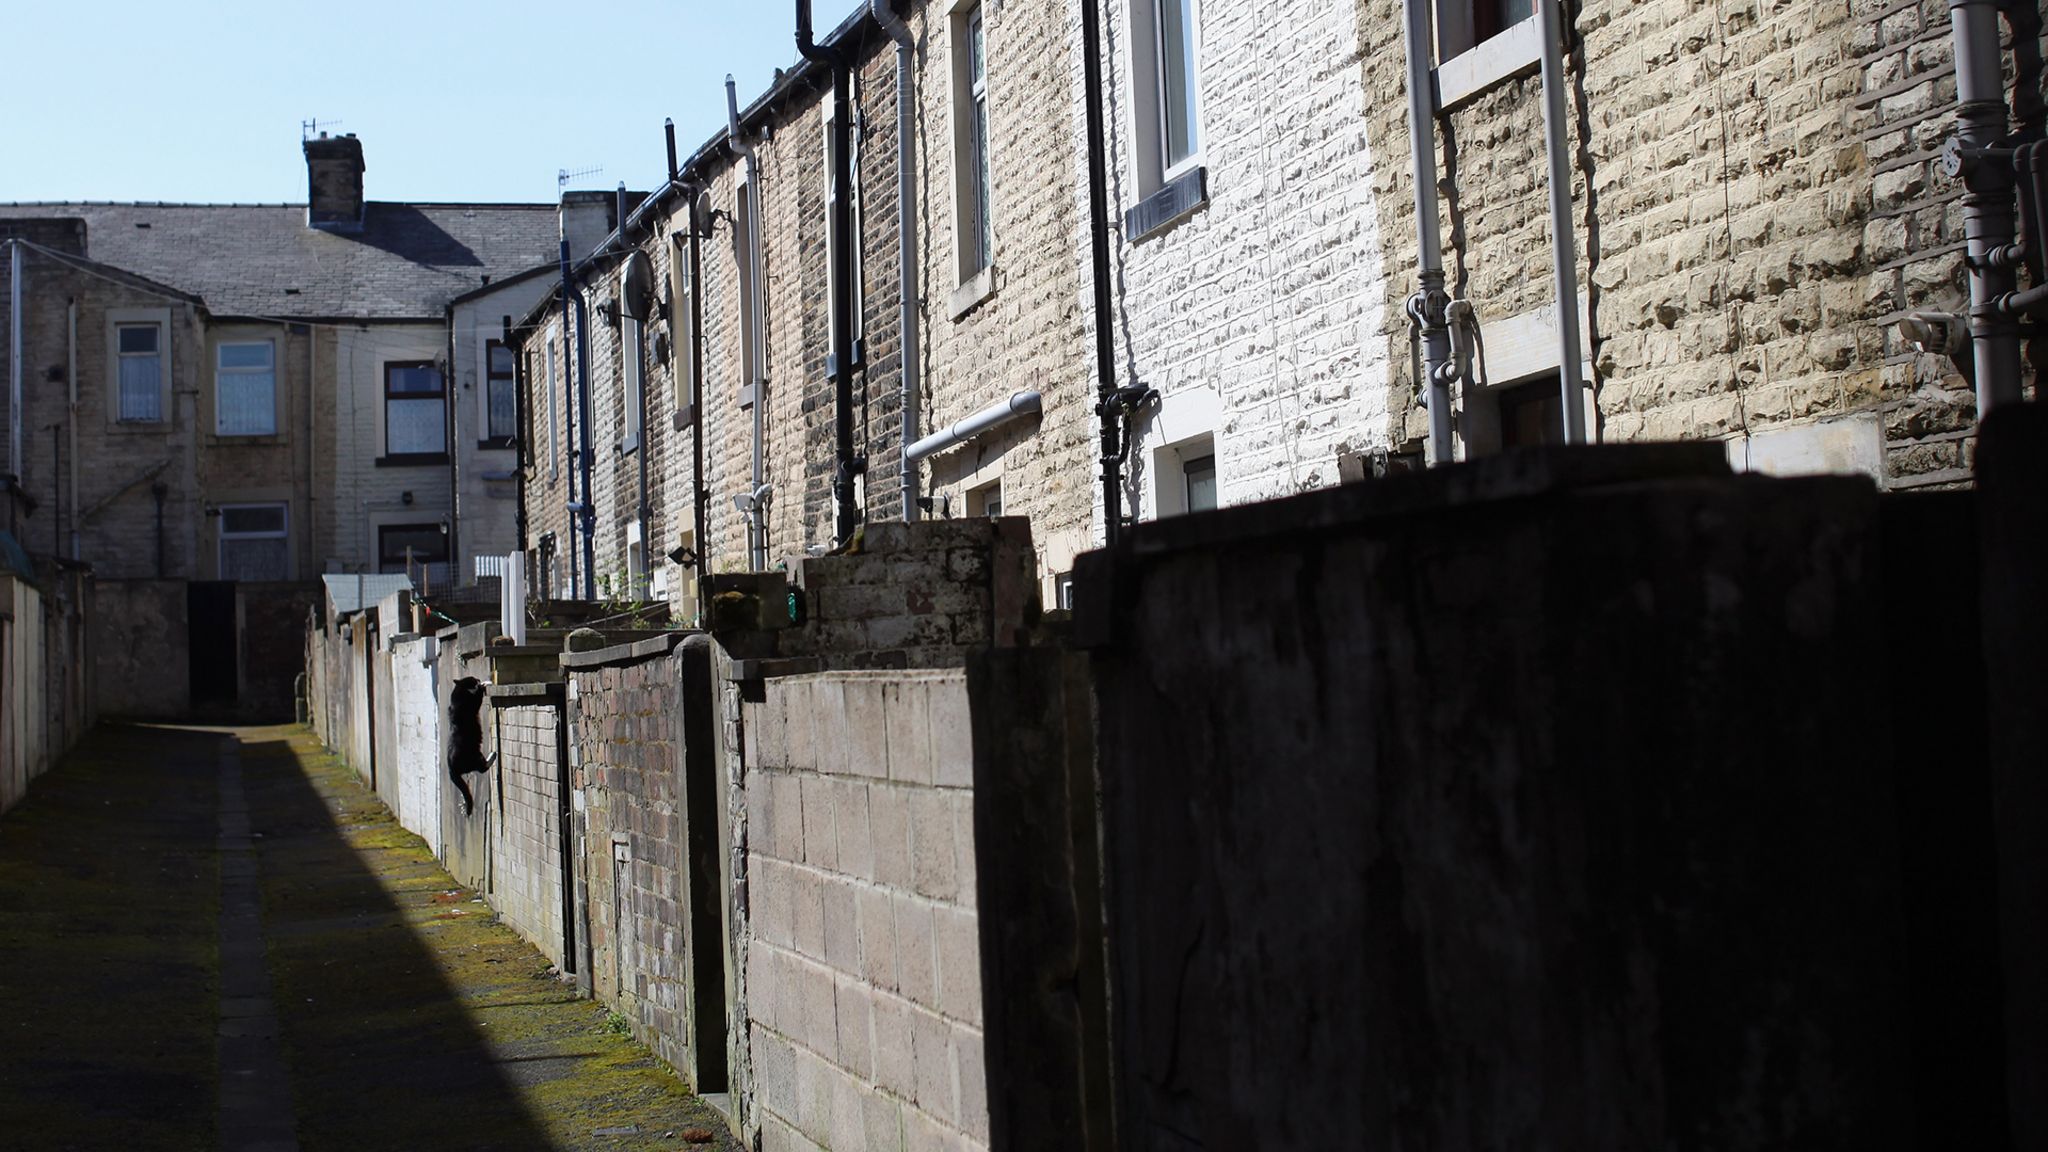 Old terraced houses in Burnley, Lancashire